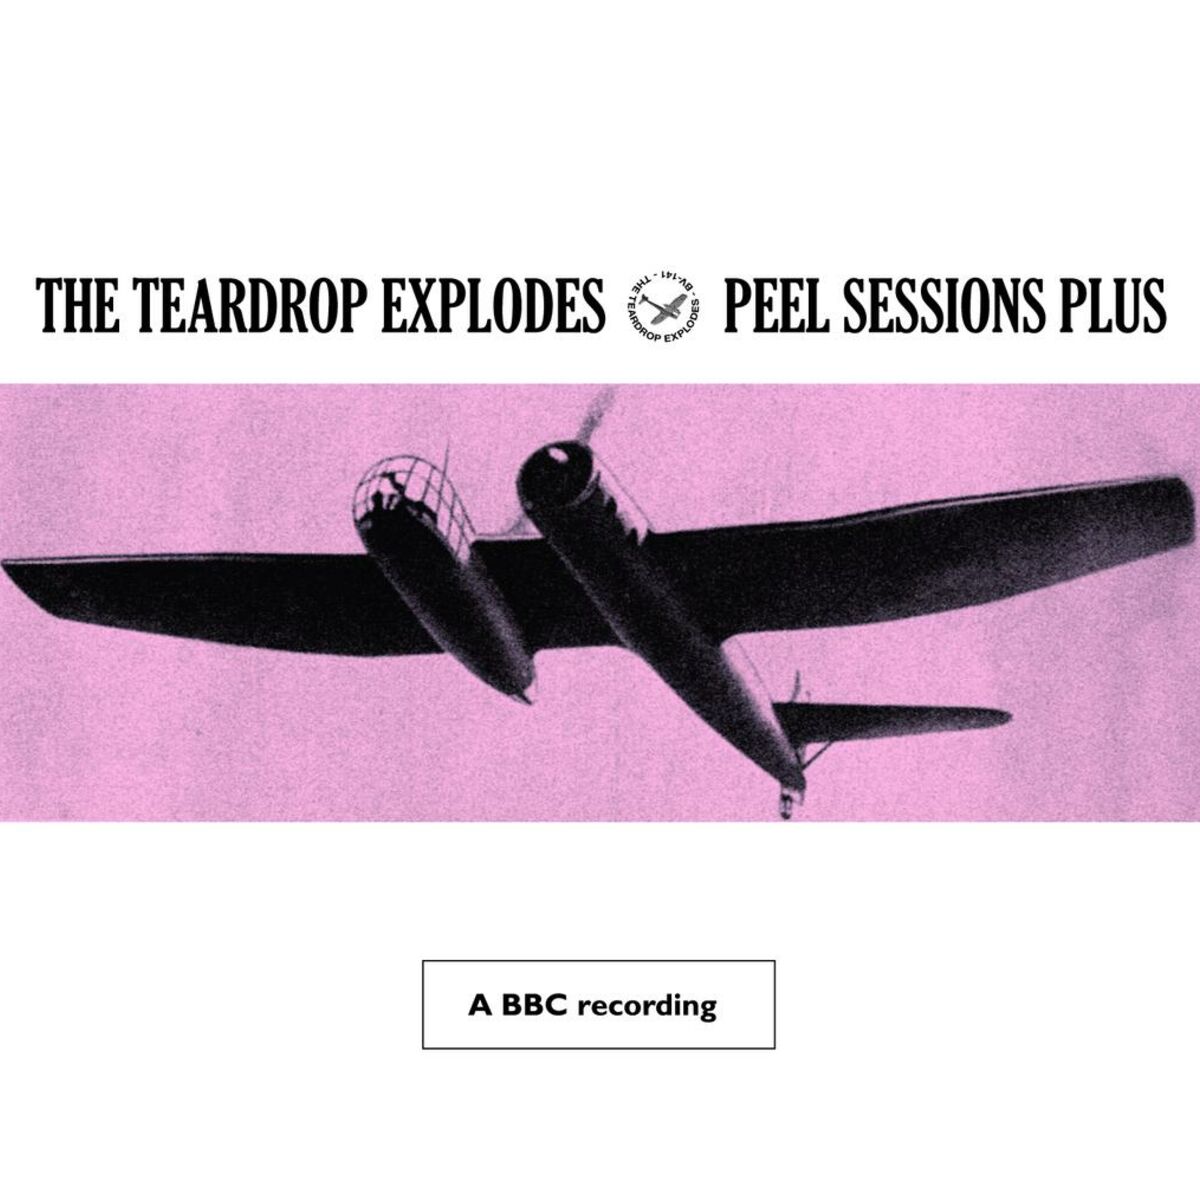 The Teardrop Explodes: albums